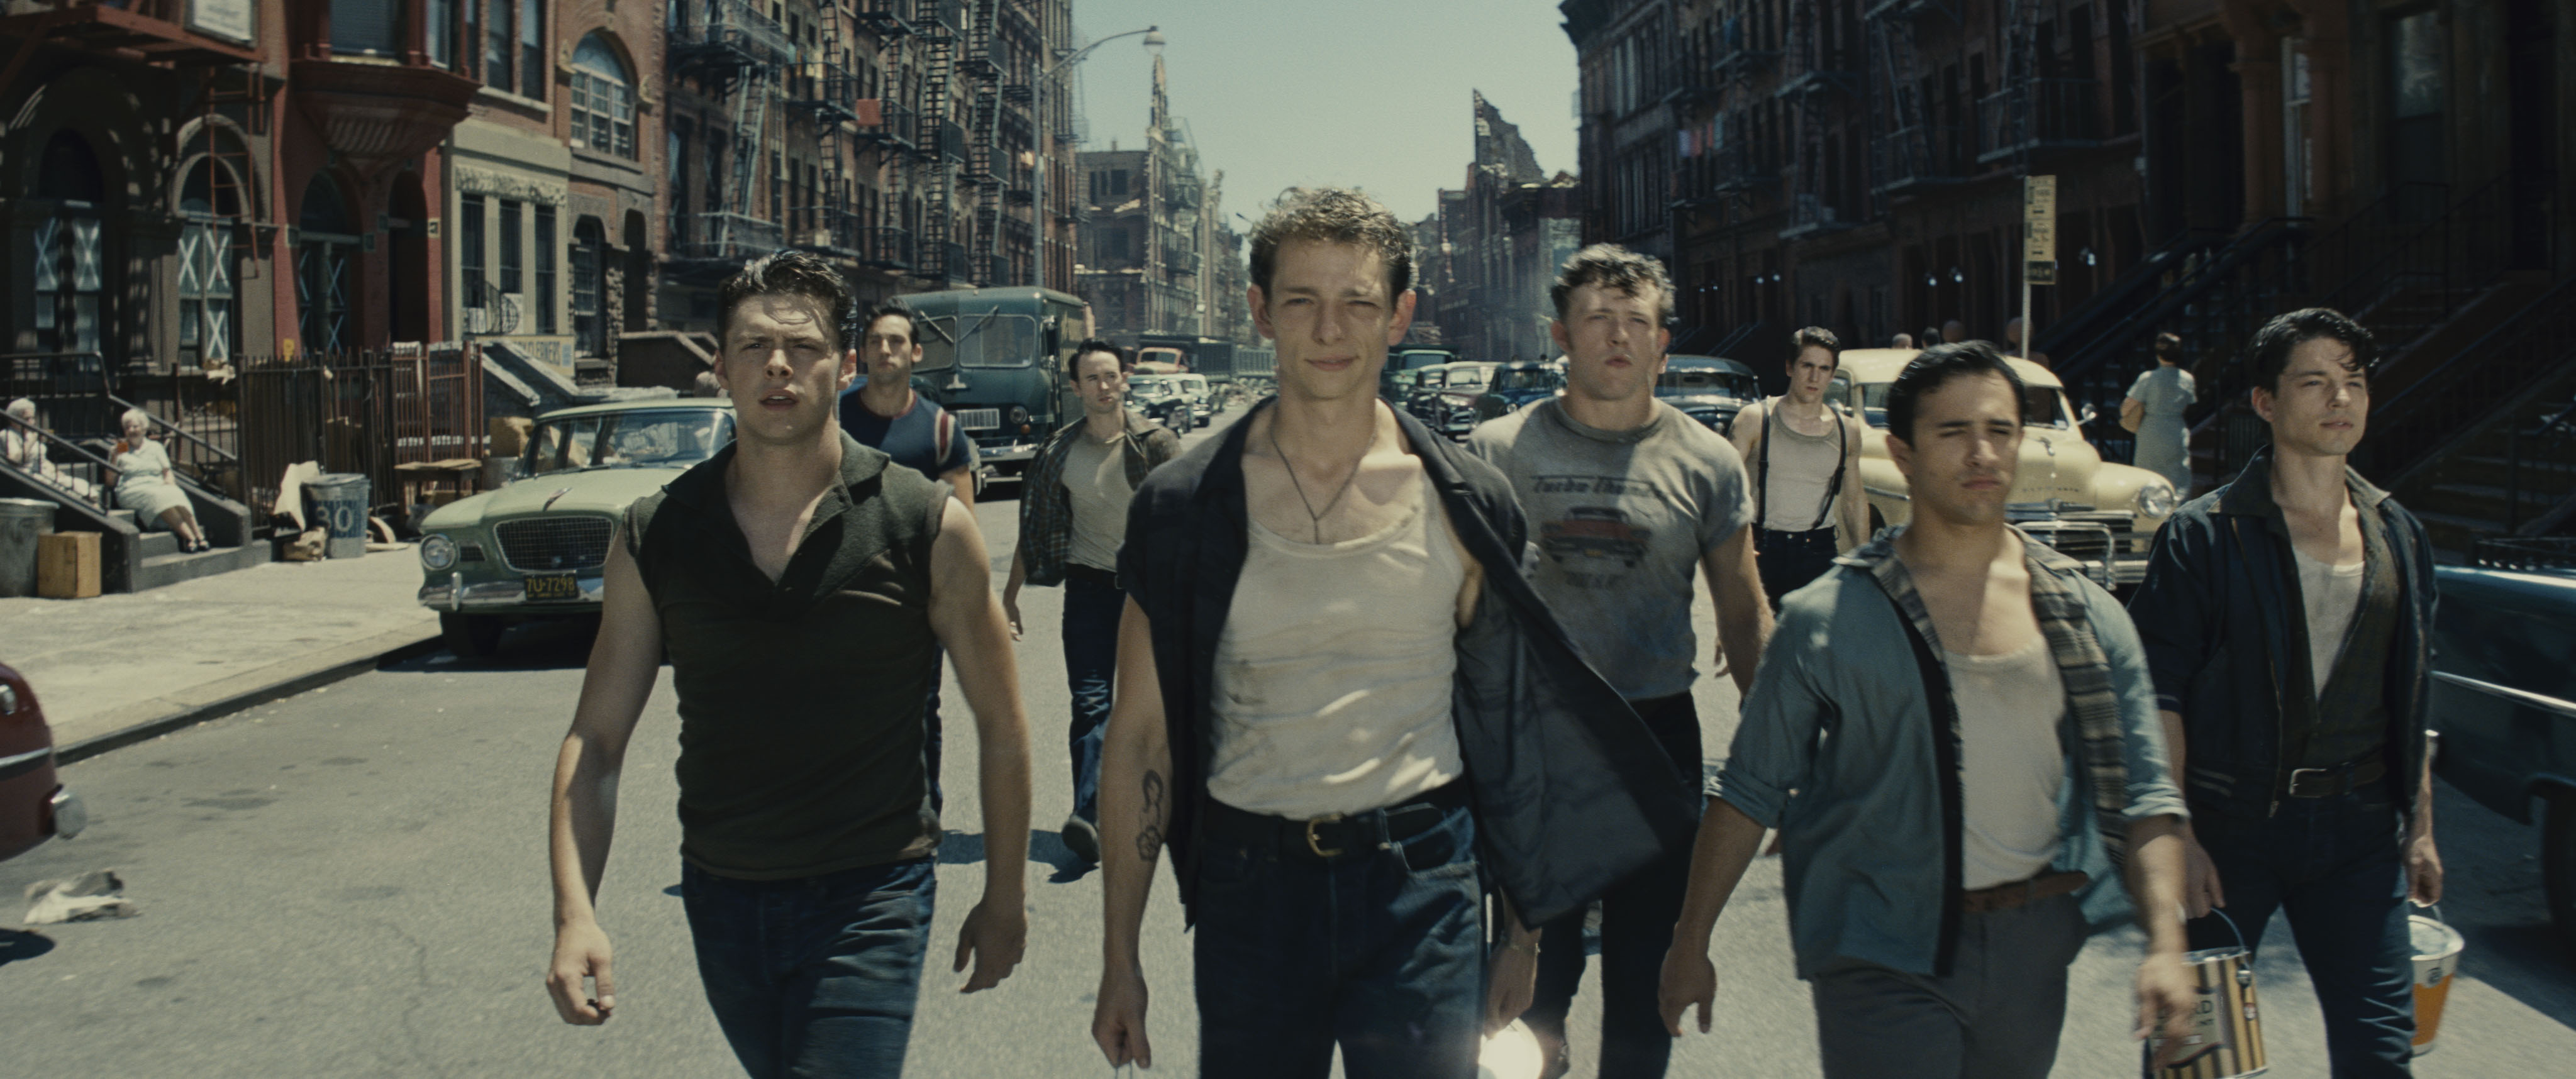 Mike Faist as Riff (center) in 'West Side Story' (Courtesy of 20th Century Studios—© 2021 20th Century Studios. All Rights Reserved.)